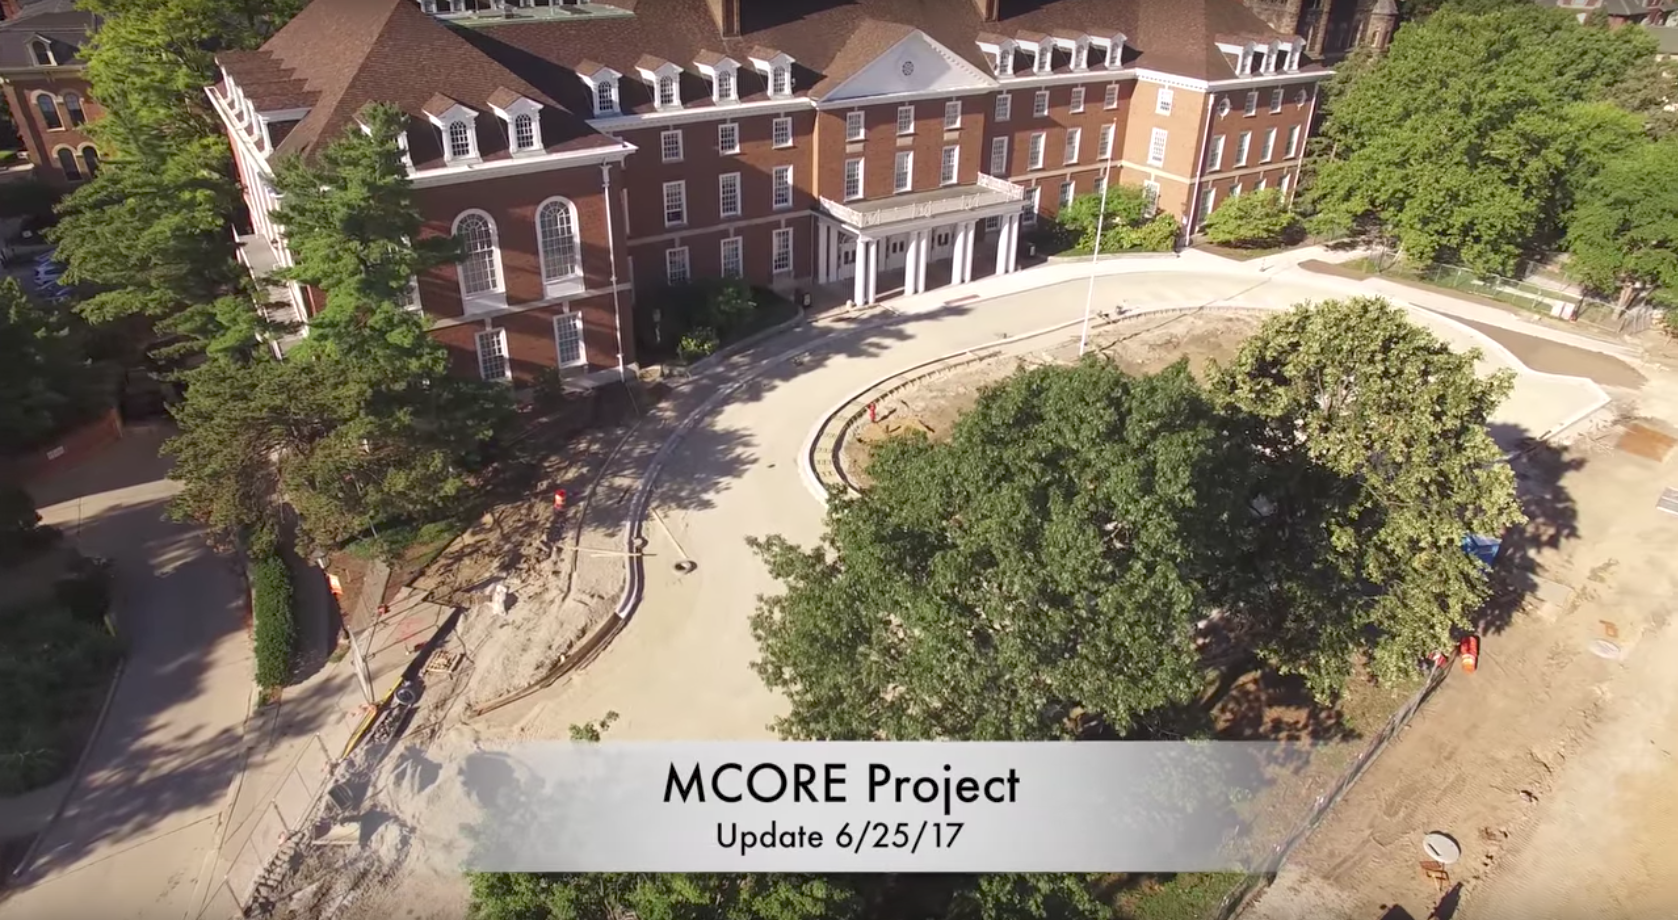 Watch this sweet drone footage that catalogs MCORE’s recent progress